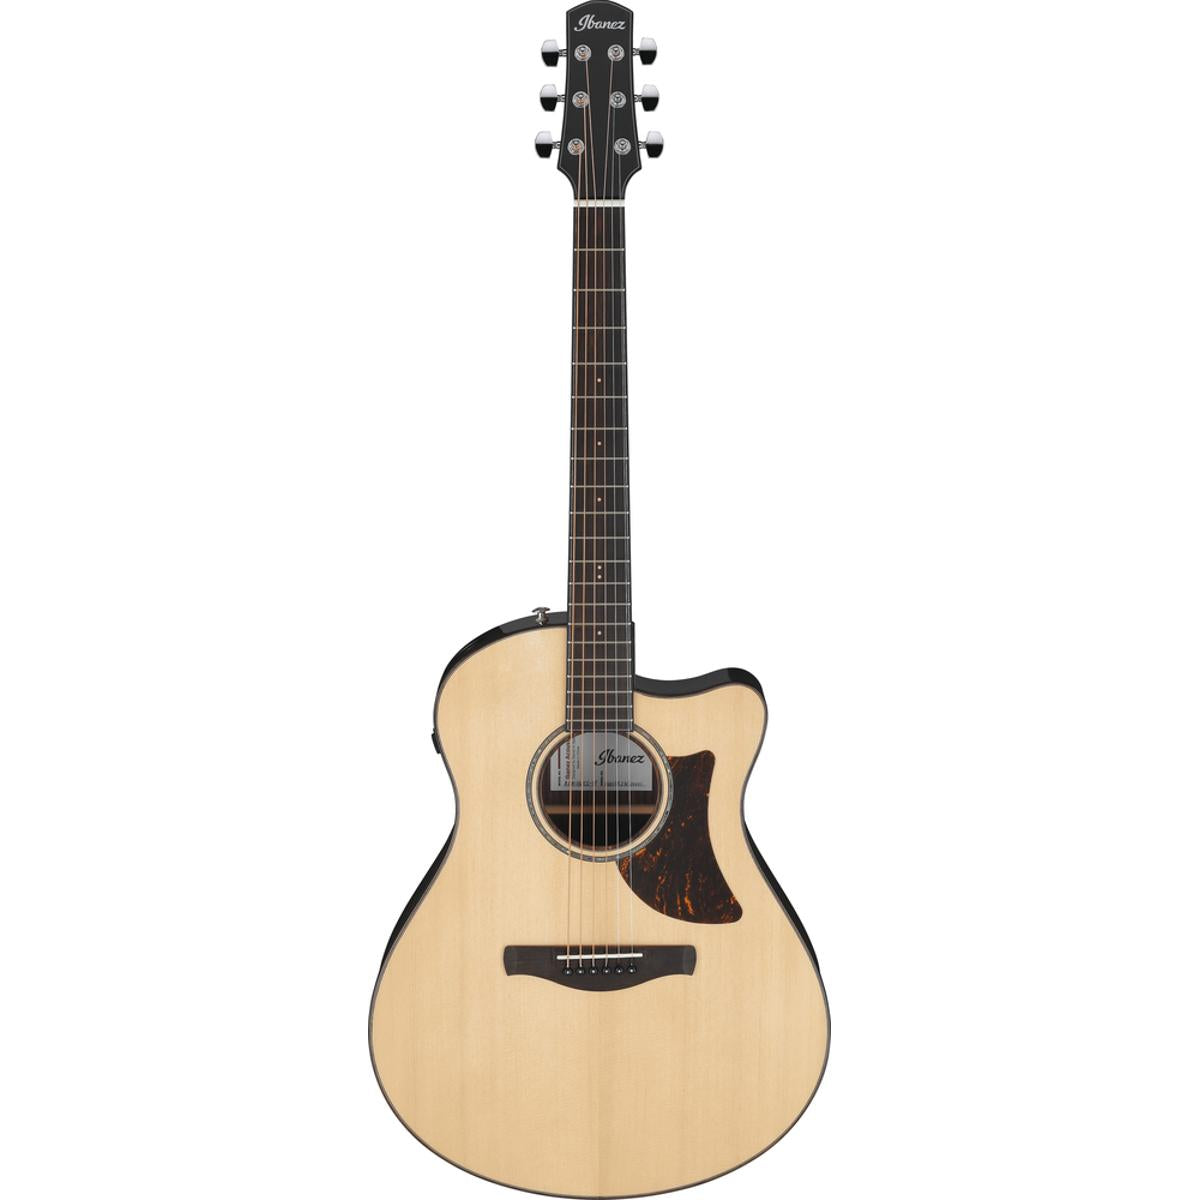 Ibanez AAM380CE Acoustic Guitar Natural High Gloss w/ Pickup & Cutaway